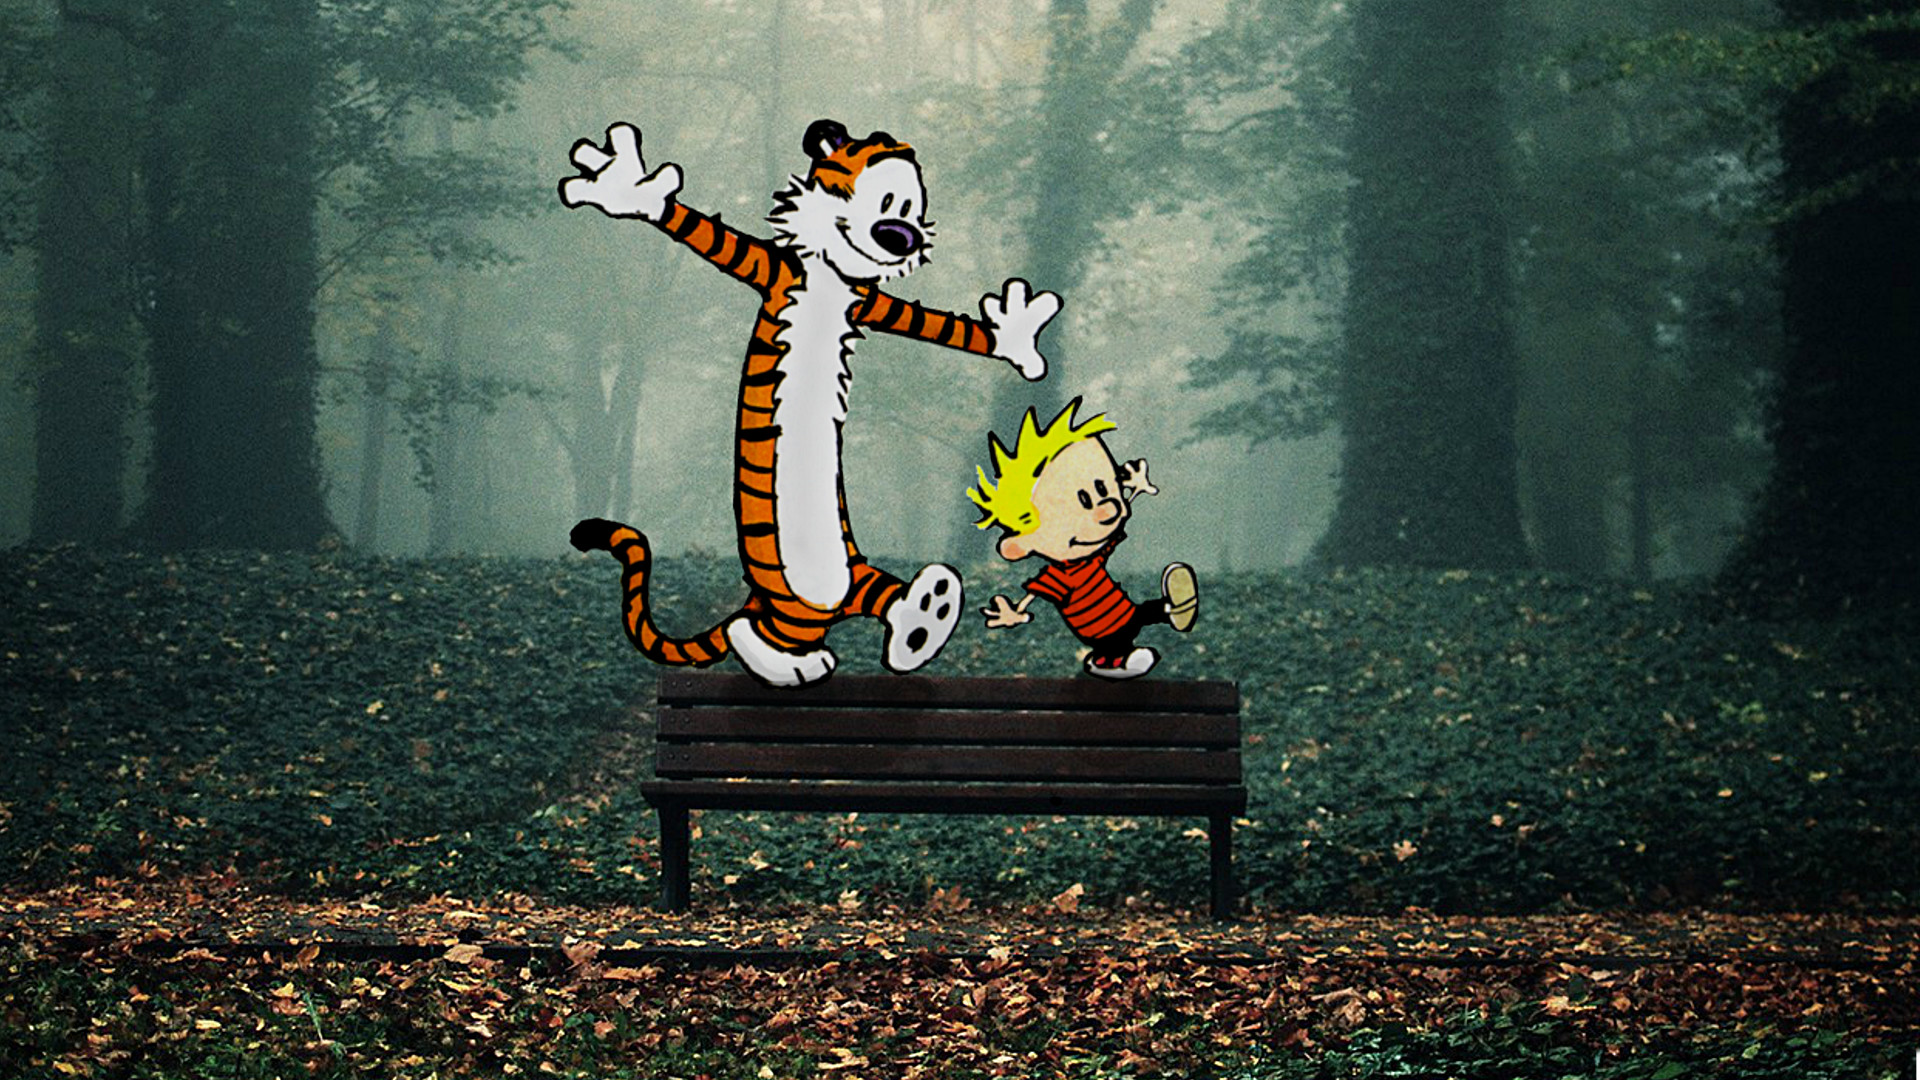 1920x1080 Calvin and Hobbes wallpaper by gwoovysmoothy on DeviantArt